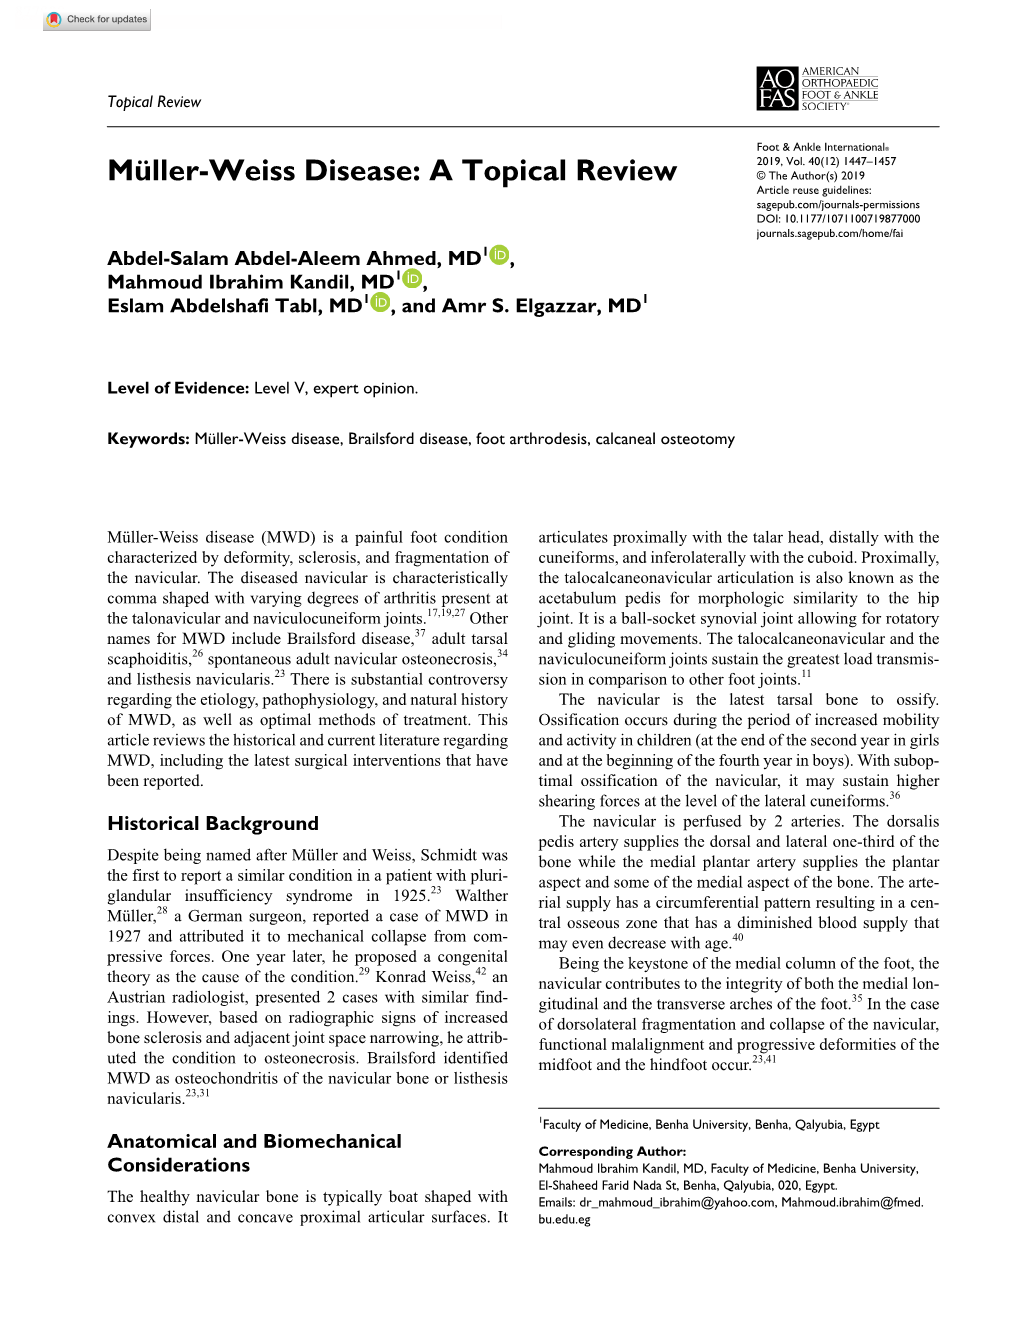 Müller-Weiss Disease: a Topical Review